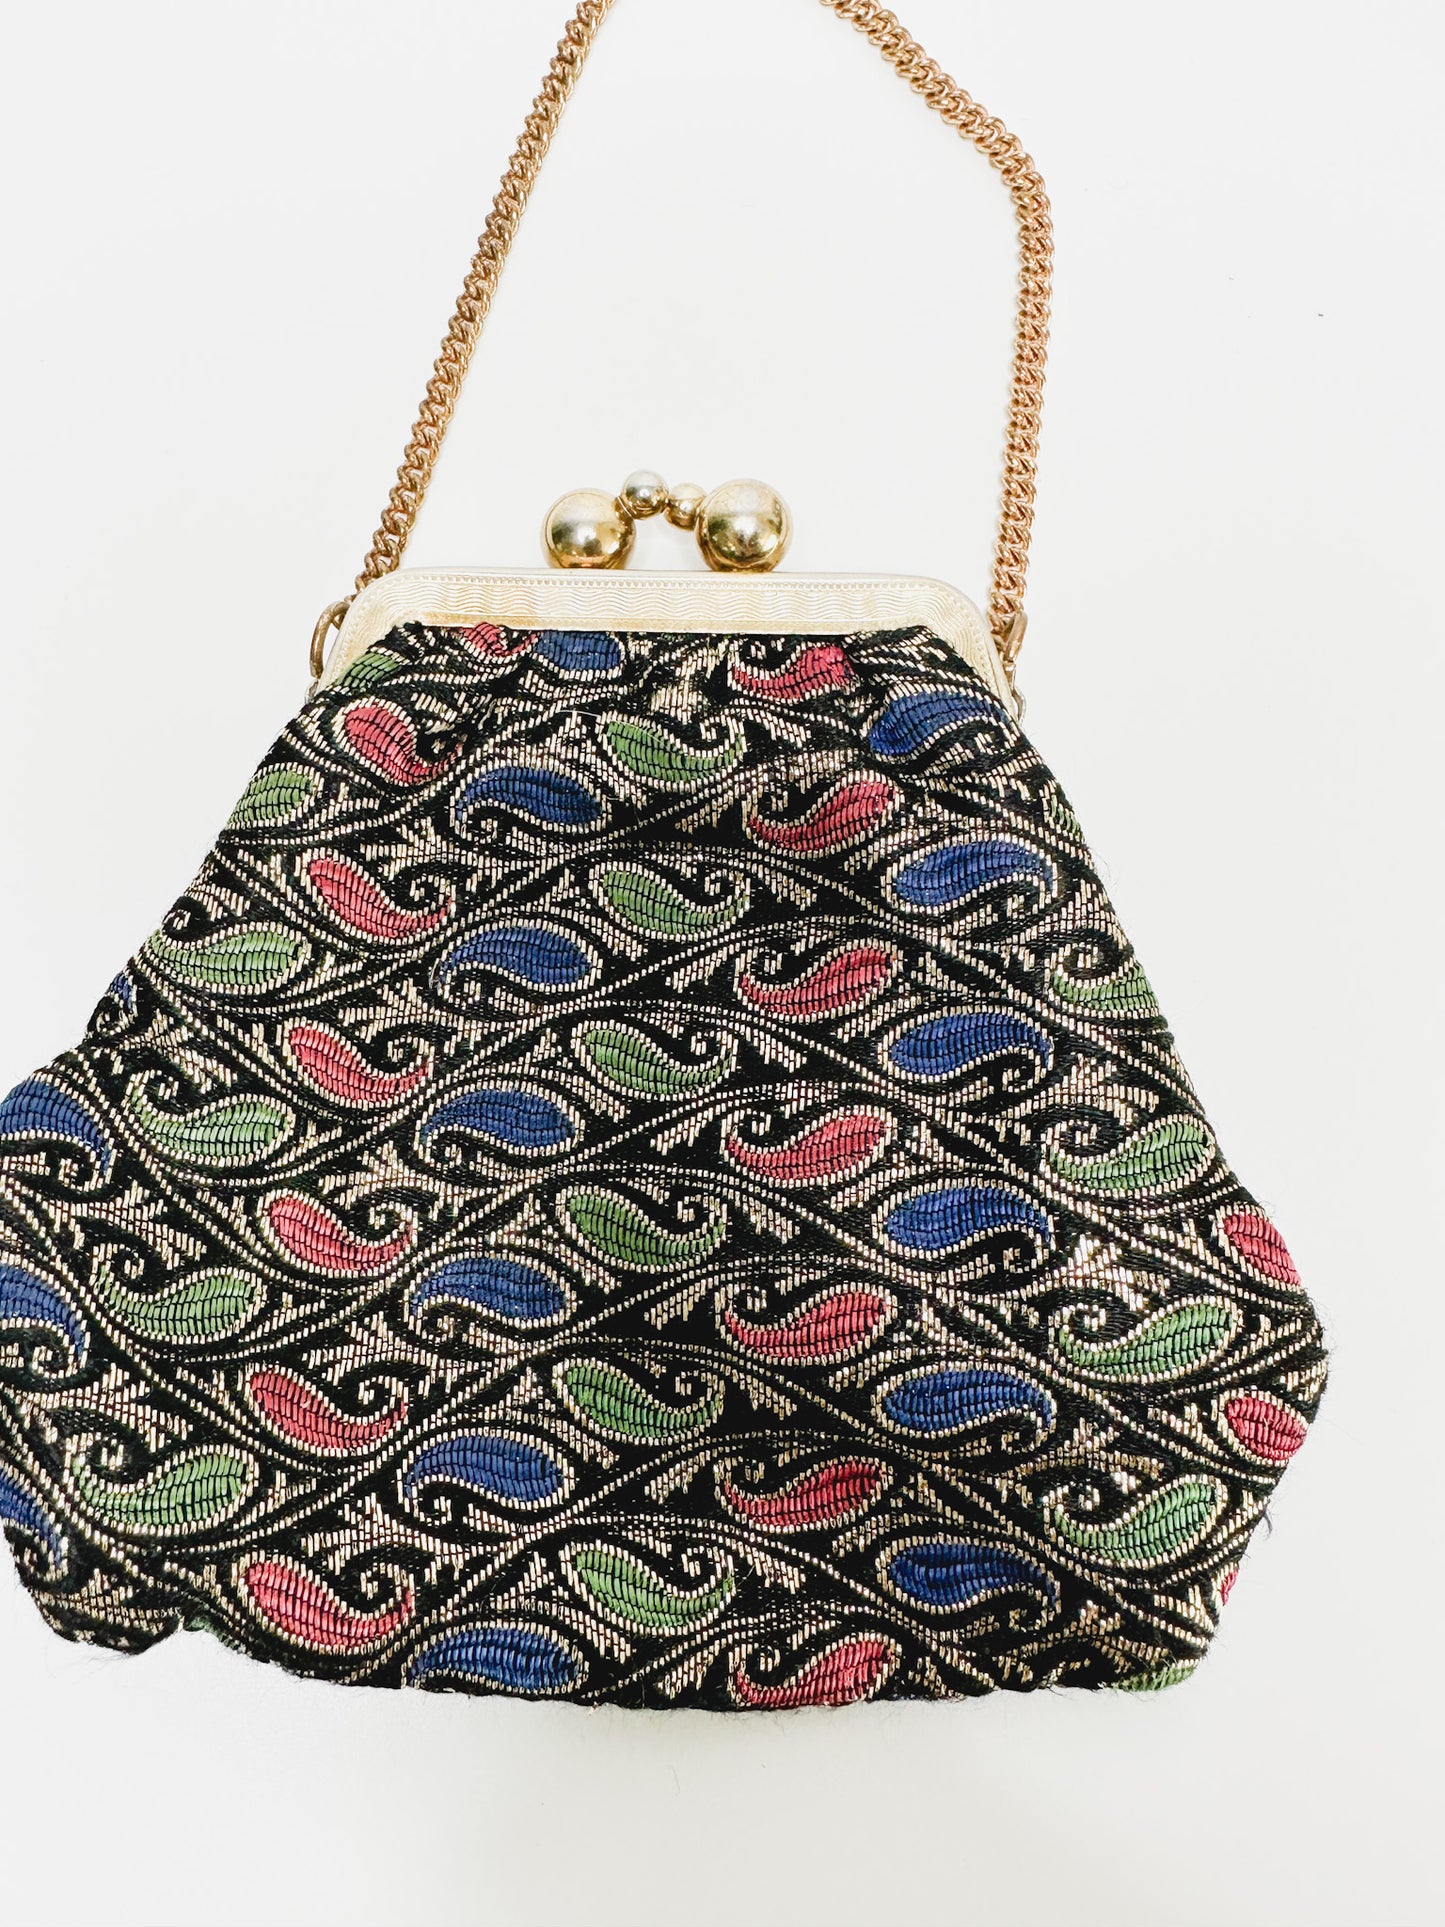 Vintage Paisley Print cocktail/Evening Purse with Gold Hardware